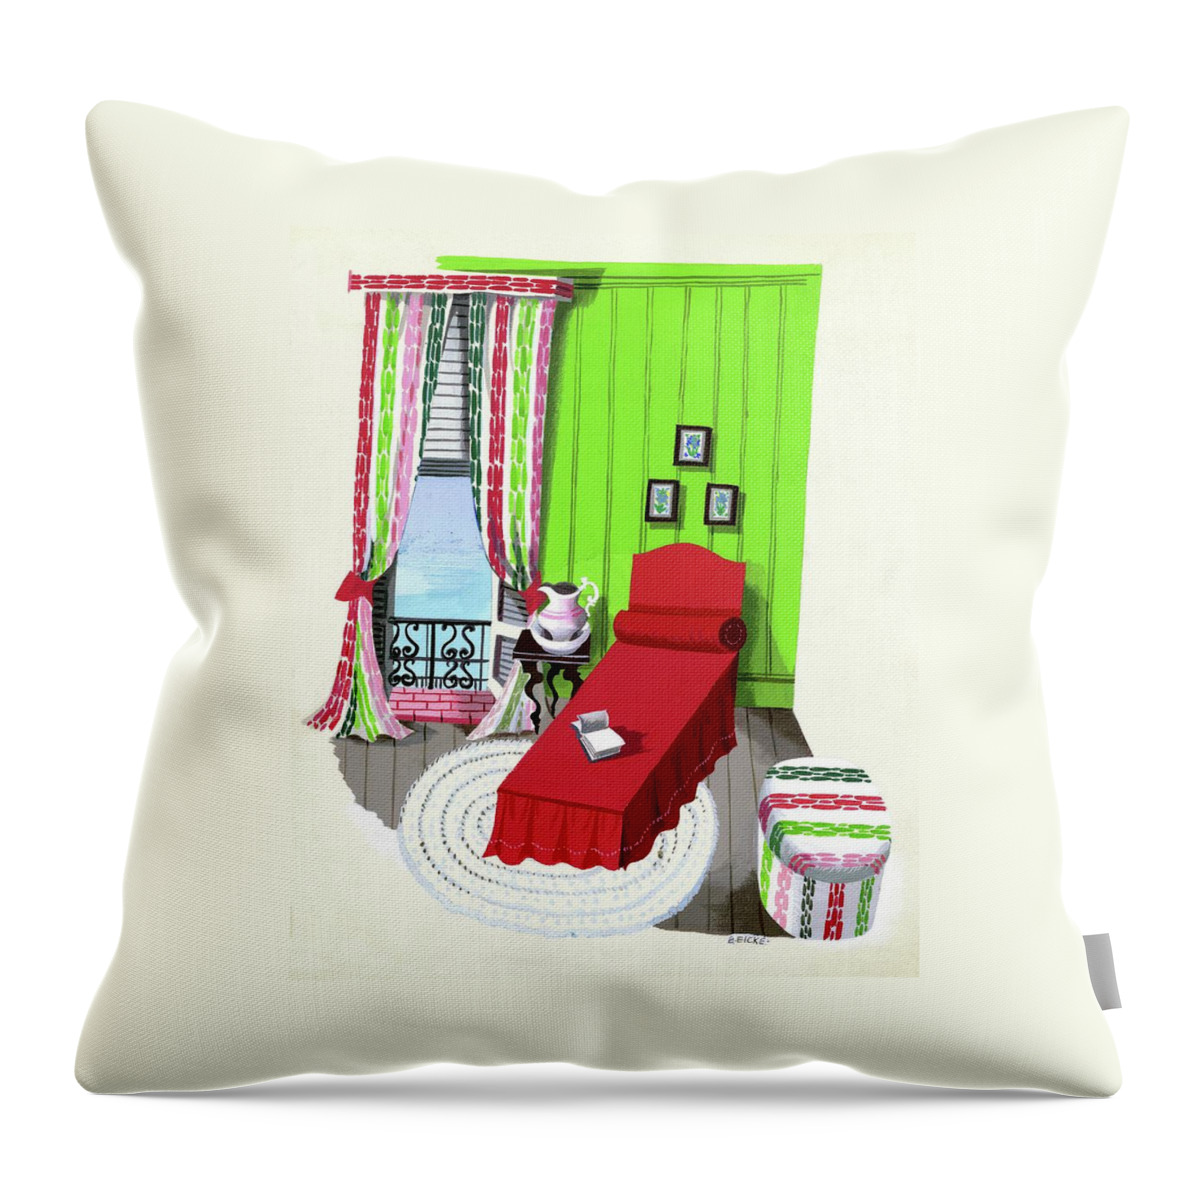 A Red Bed In A Bedroom Throw Pillow